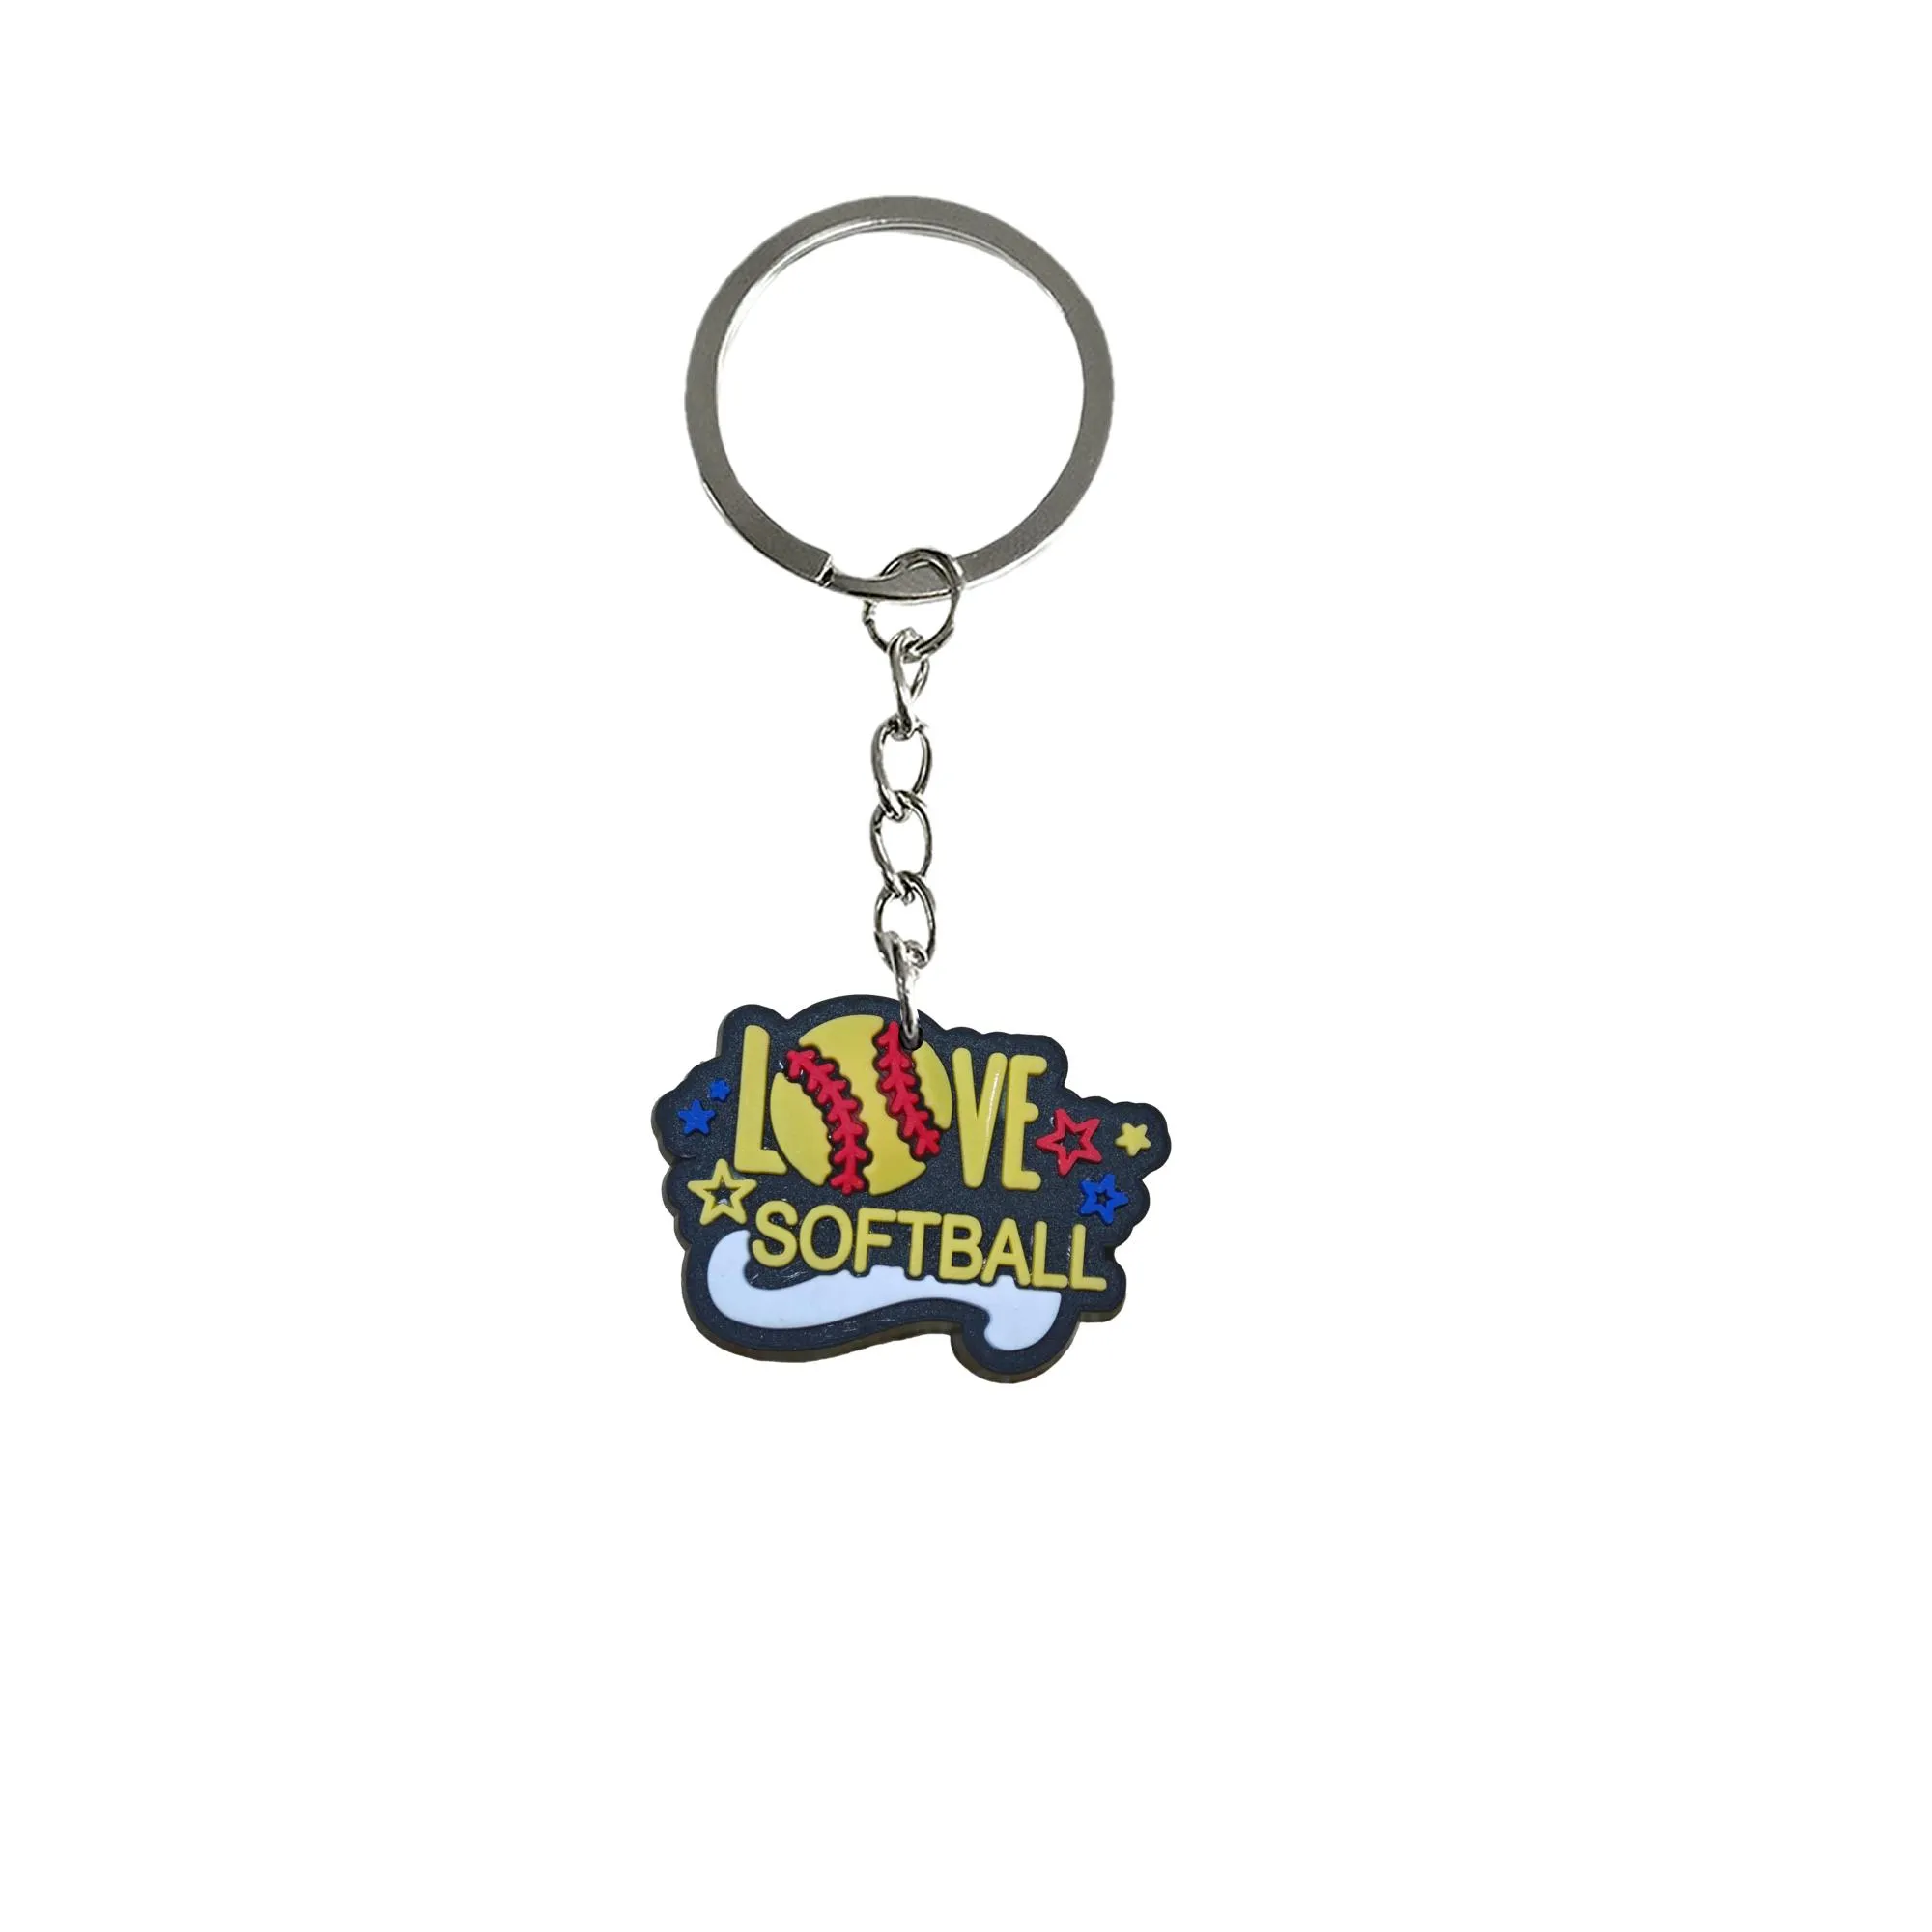 baseball keychain keychains party favors keyring for men key ring boys suitable schoolbag girls cute silicone chain adult gift christmas fans